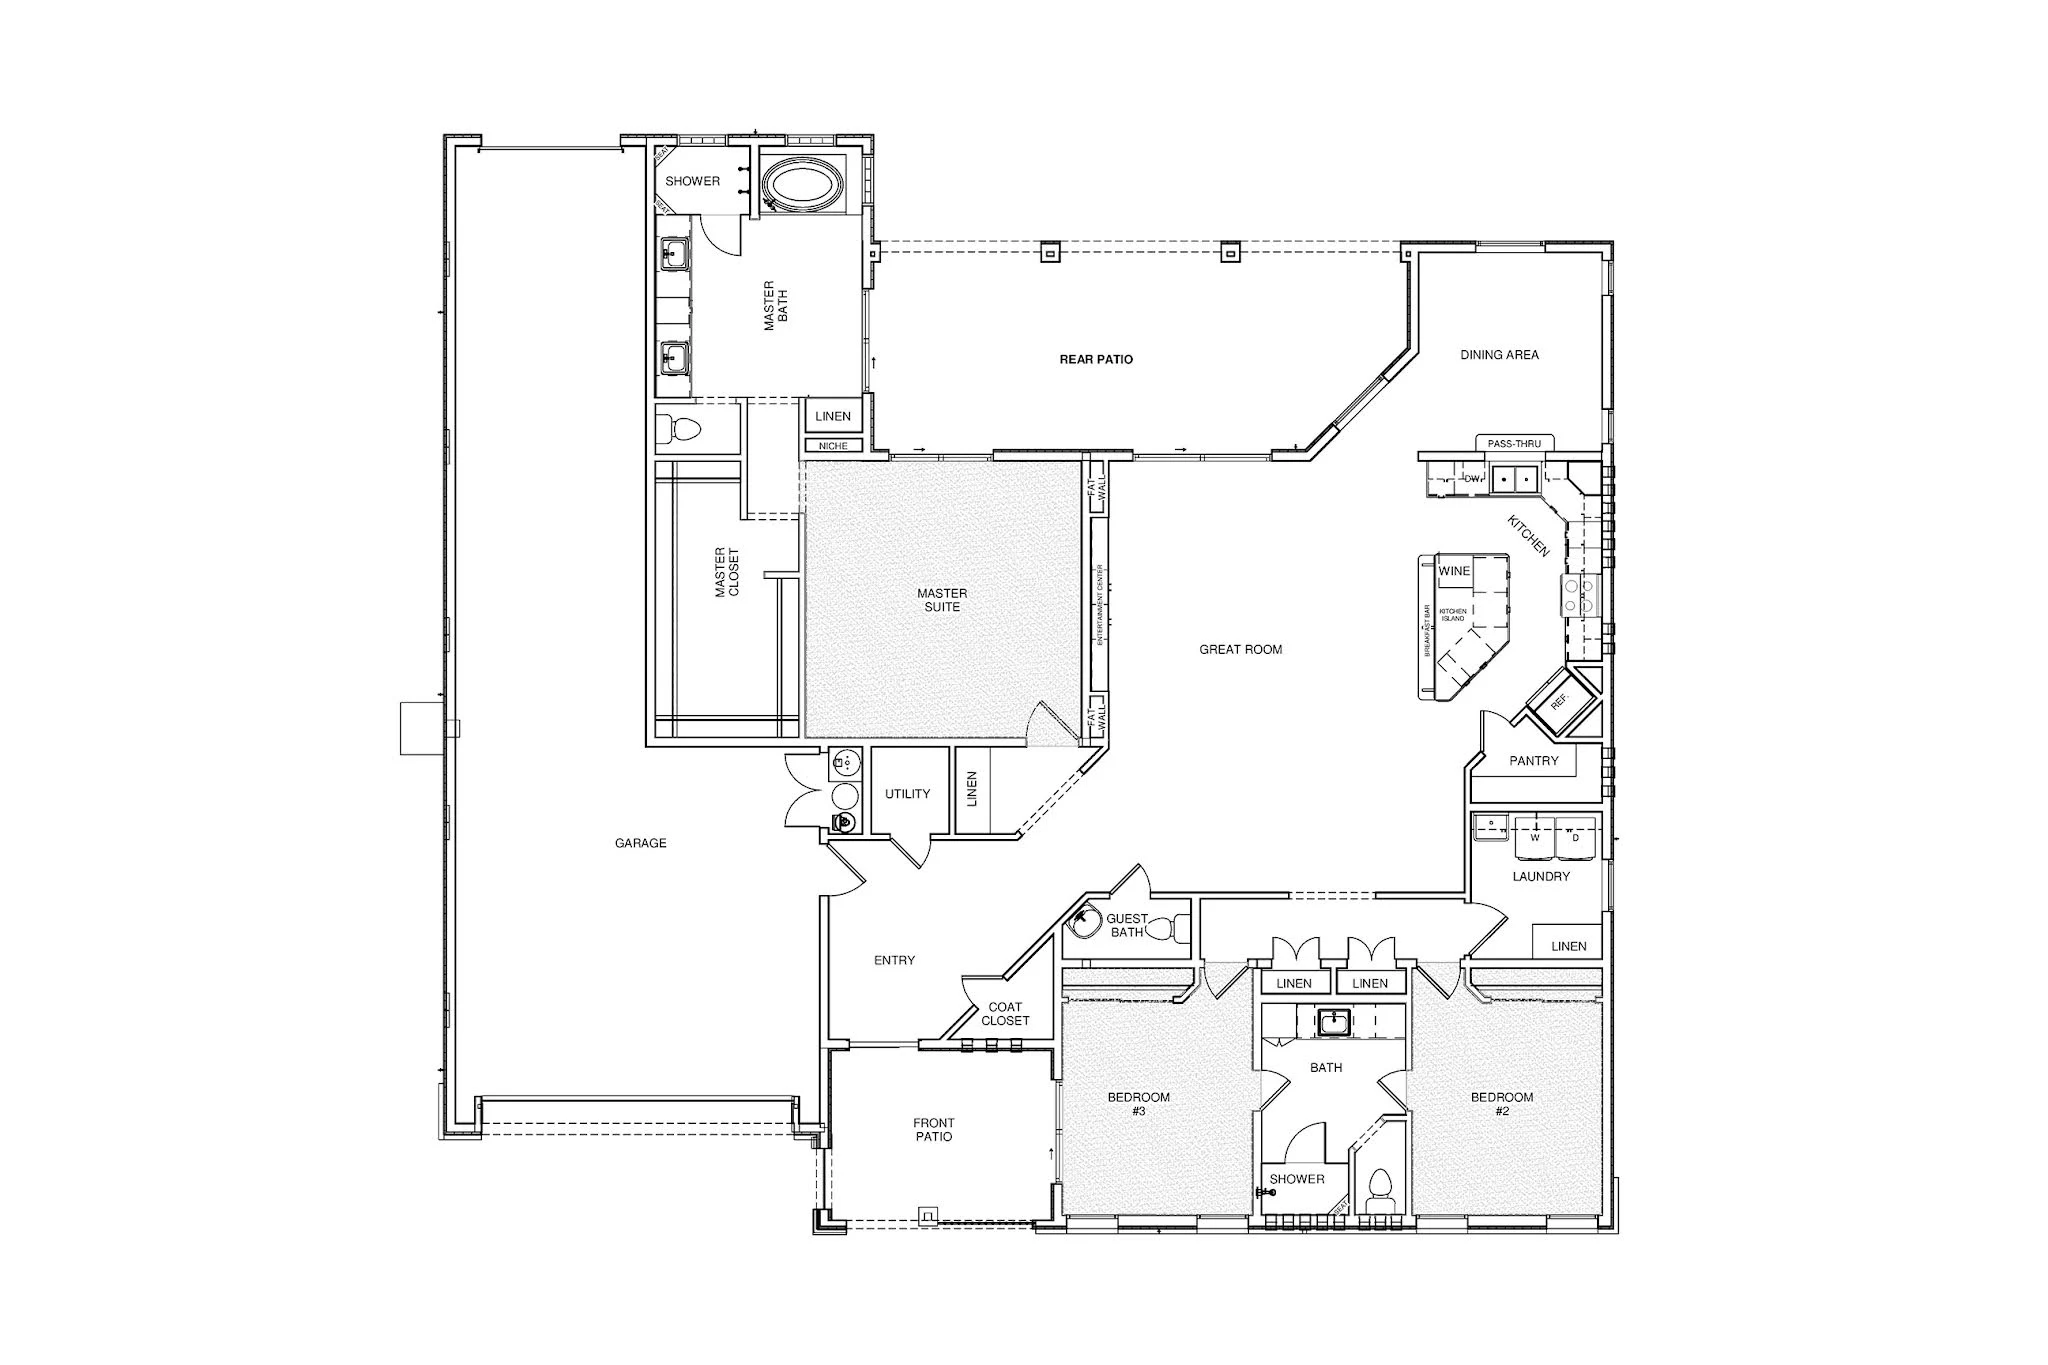 Single Family Homes 17 - ACE Design Drafting